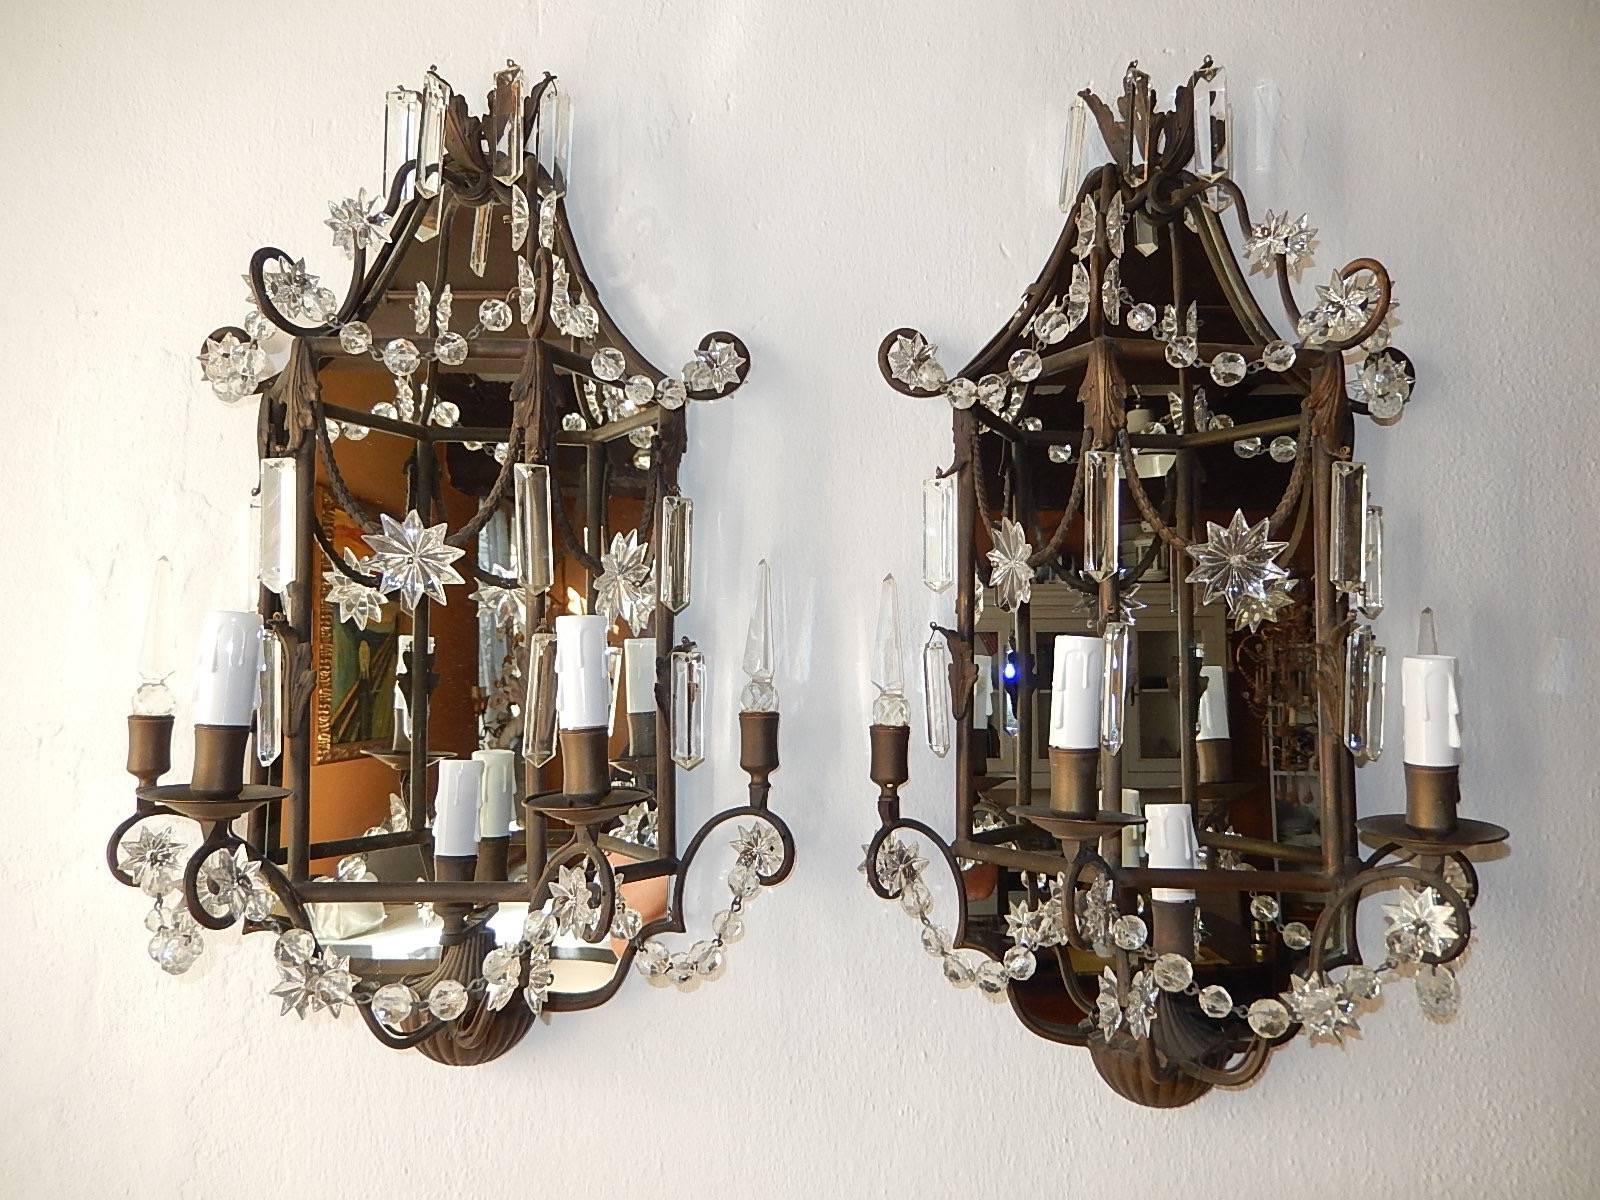 Housing three-lights. Will be re-wired with certified UL US sockets for the United States and appropriate sockets for other countries and ready to hang. Adorning crystal stars, prisms, balls and spears, all intact. Mirrors were replaced. Free